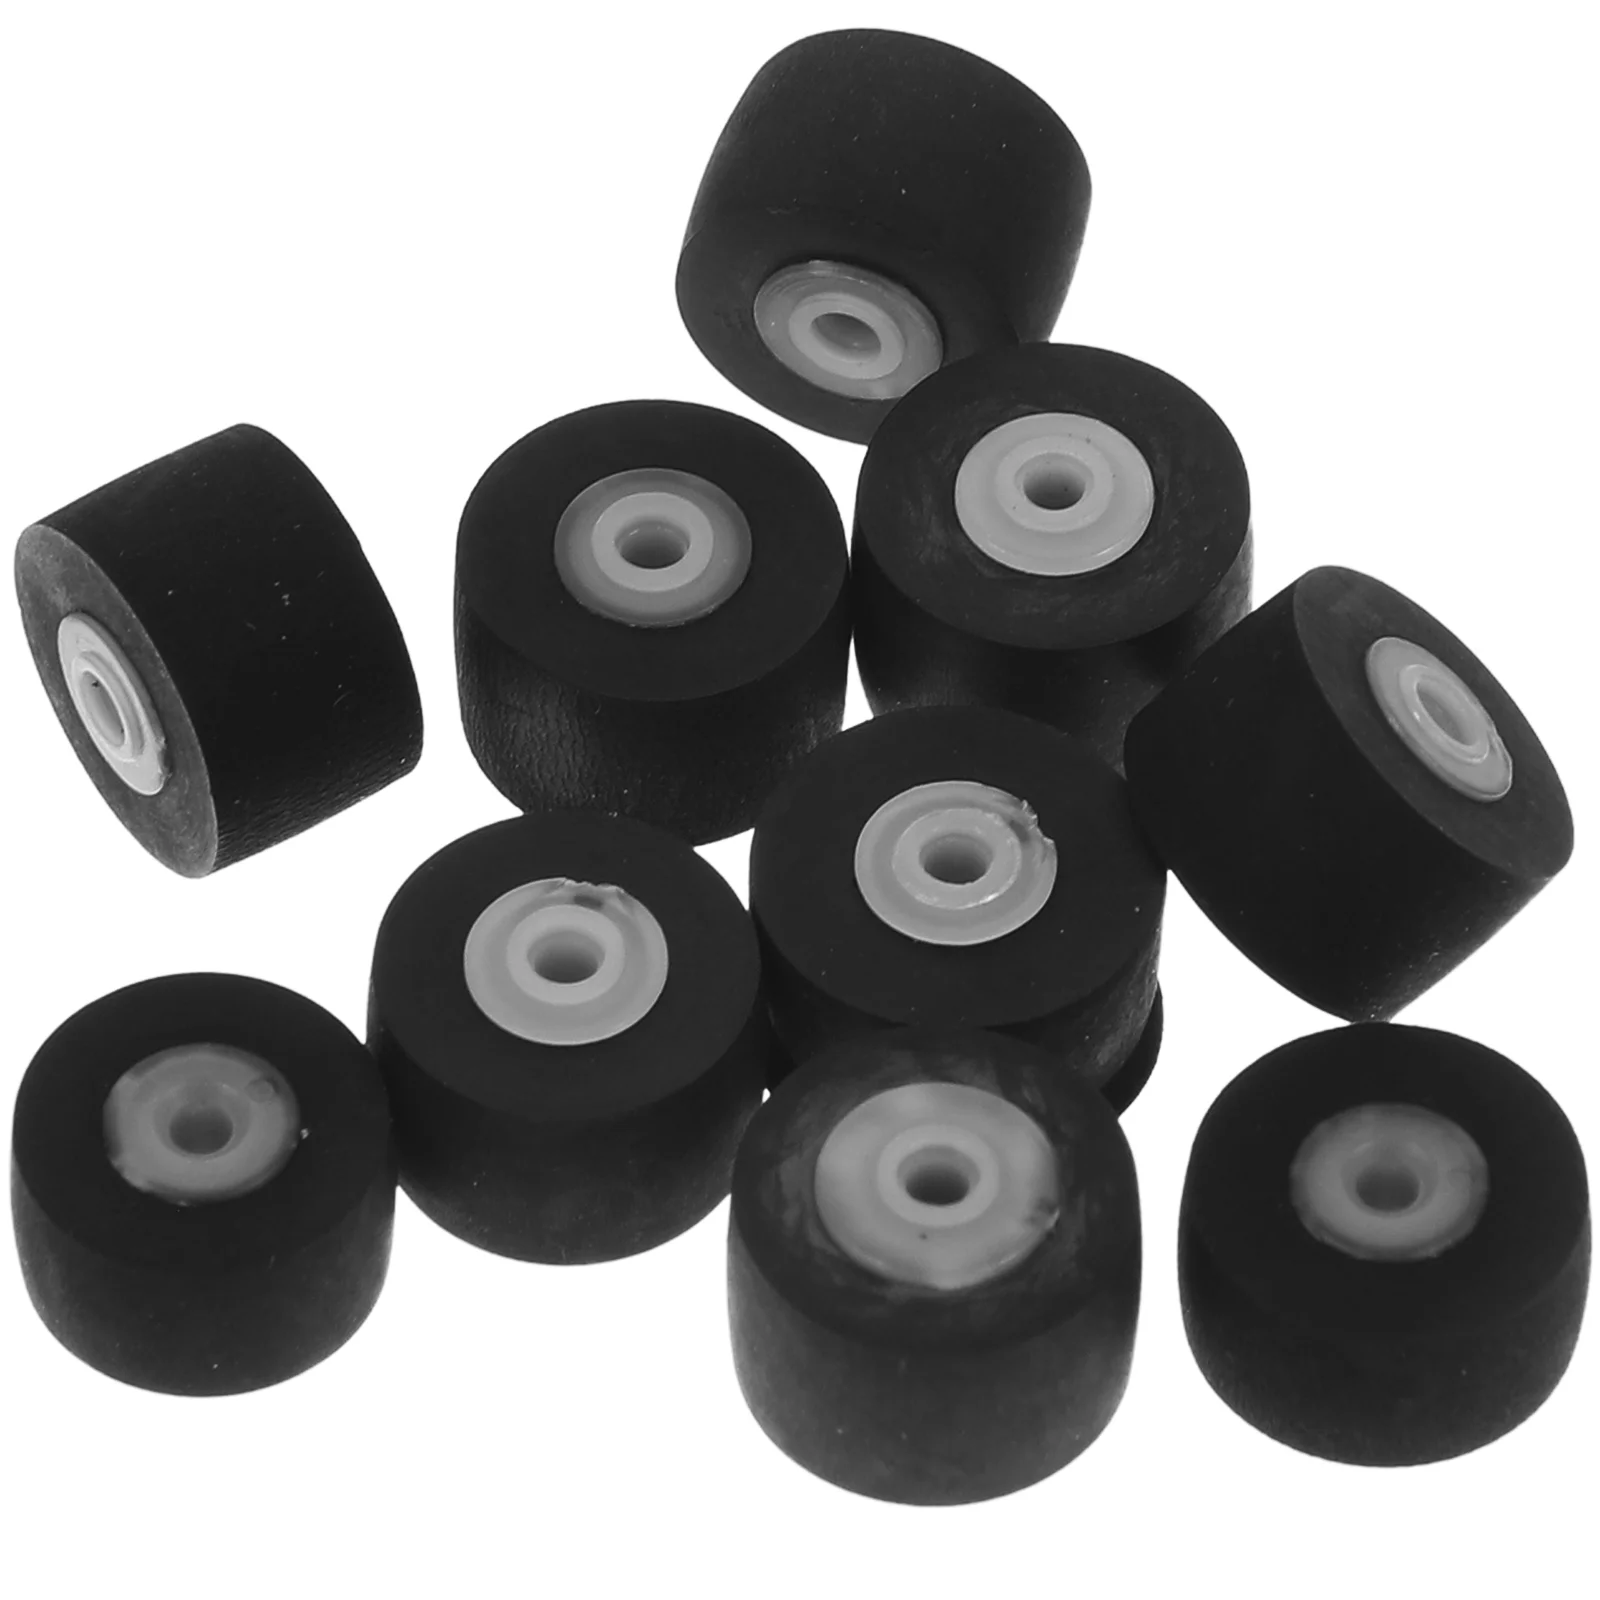 

10 Pcs Bearing Wheel Tape Stereo Player Pinch Roller for Recorders Dvd Component Drive Plastic Deck Voice